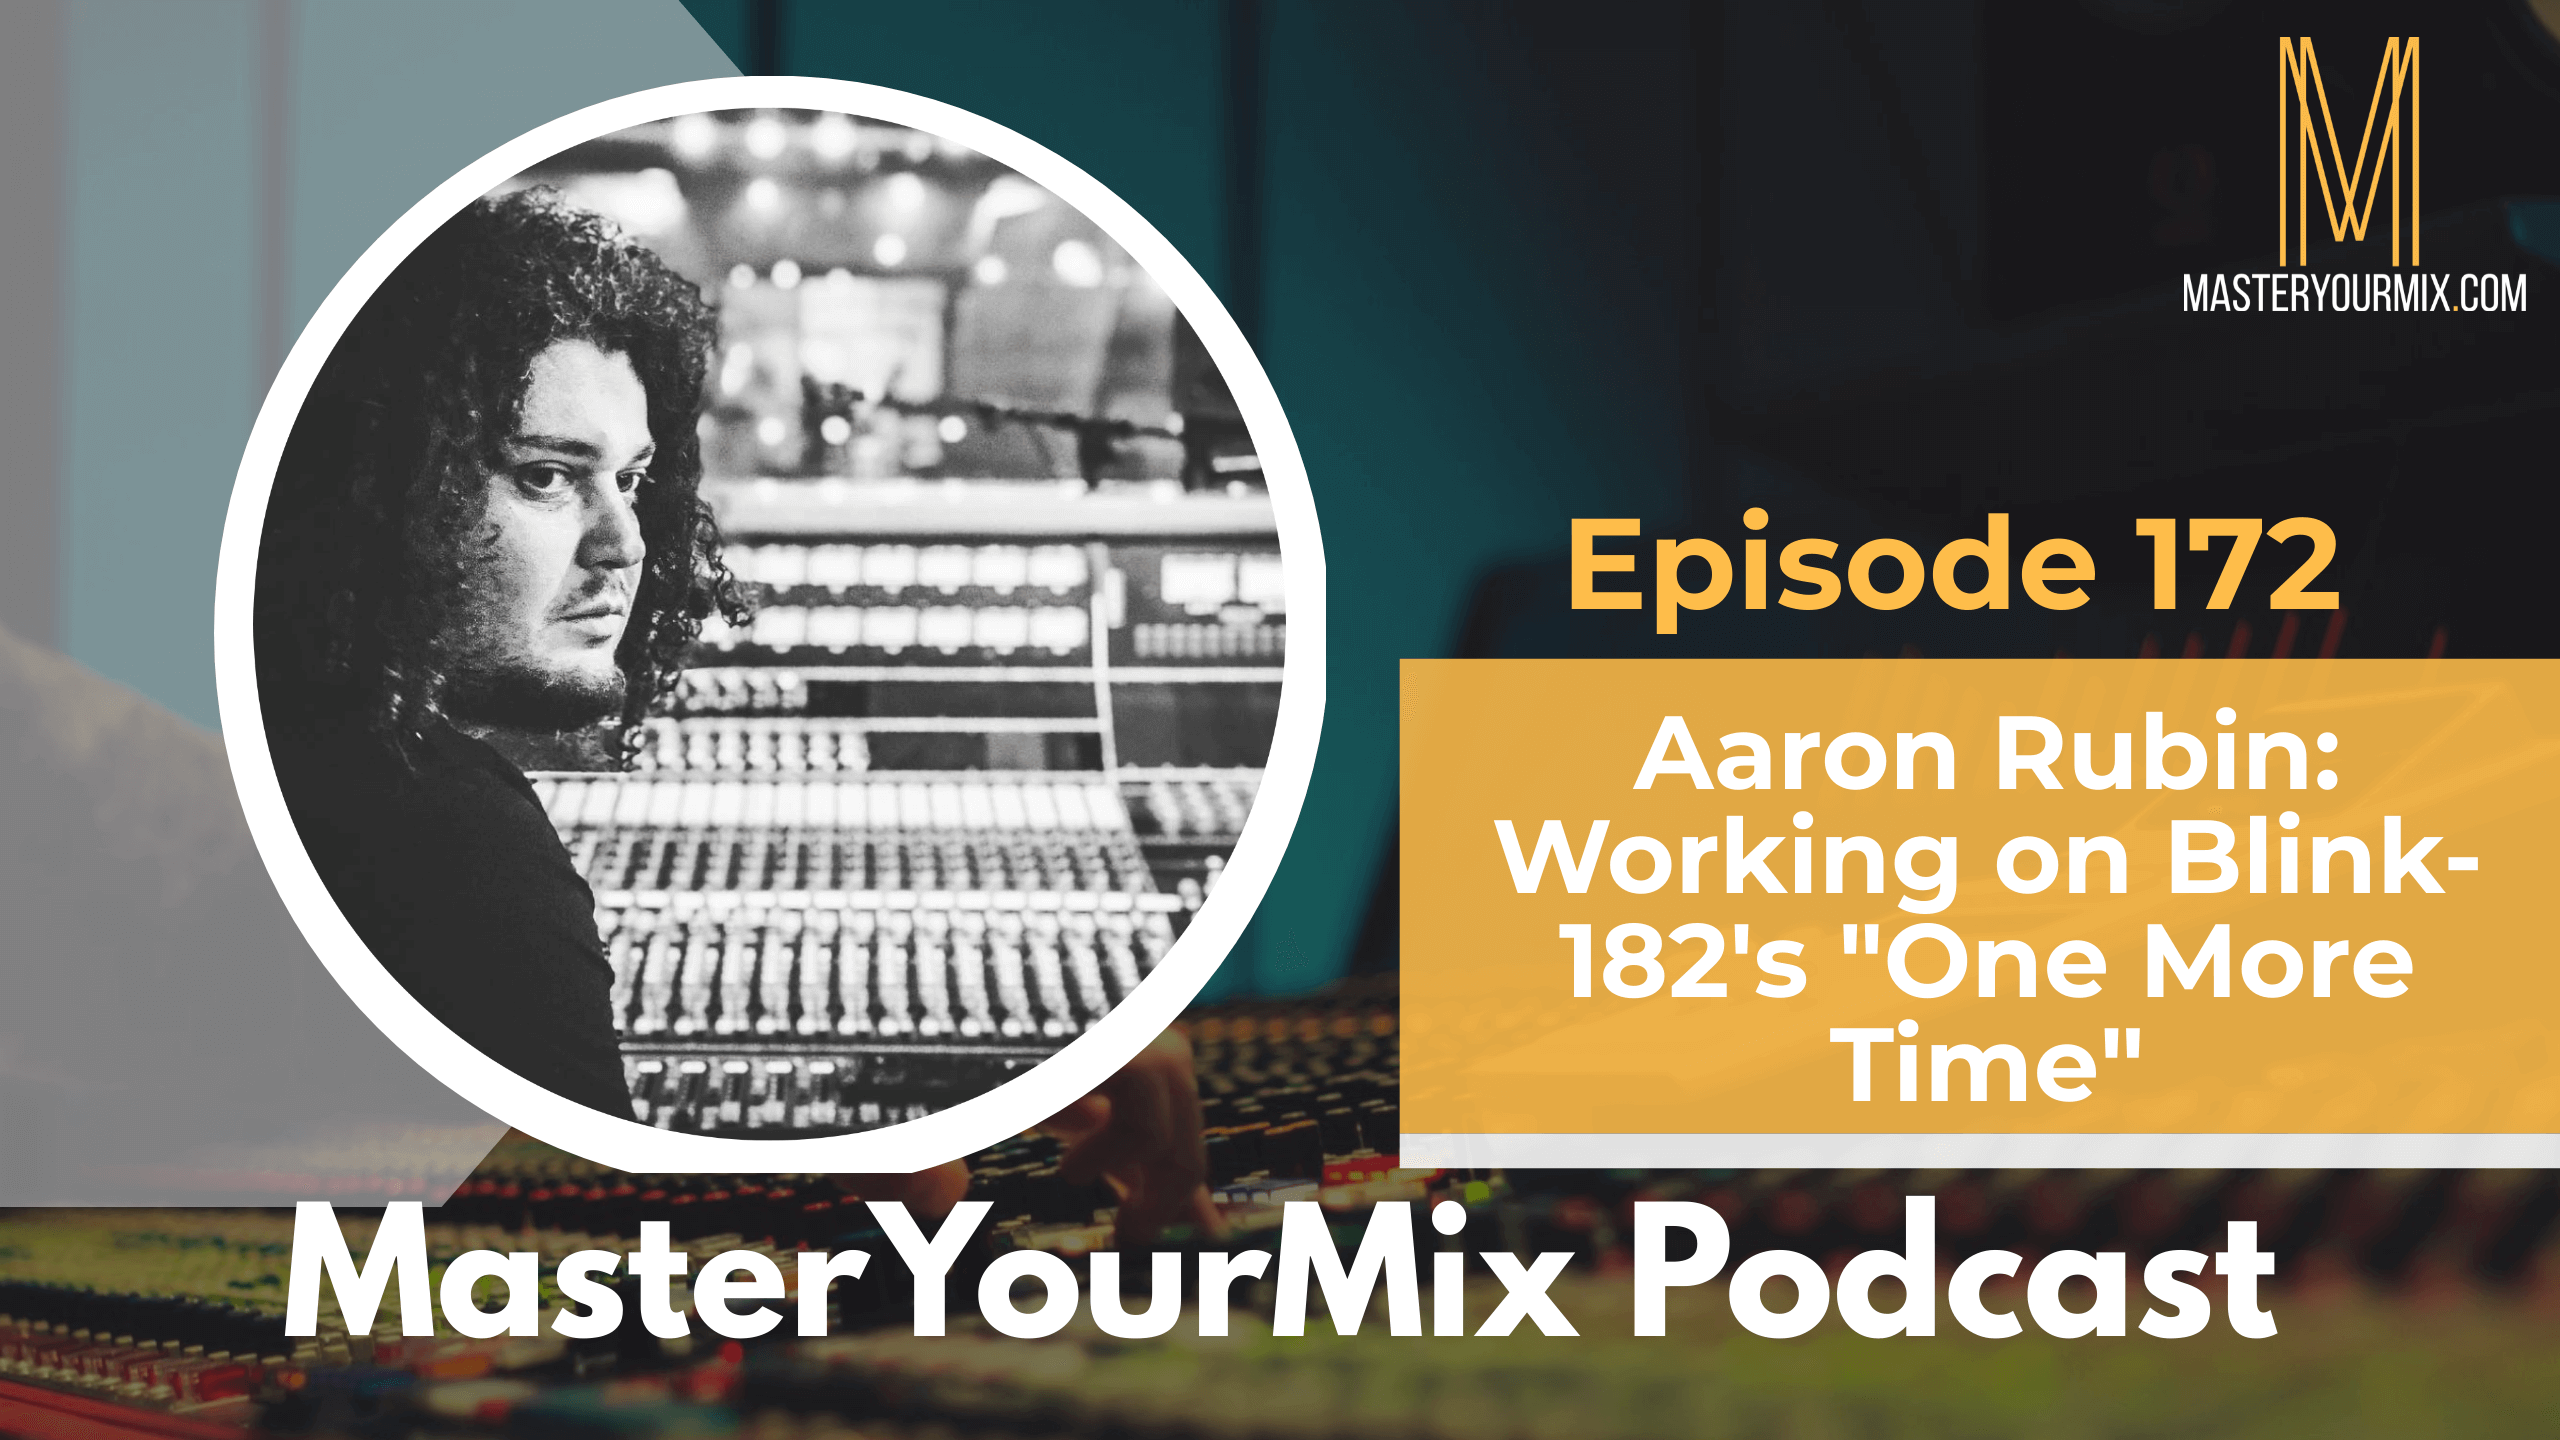 master your mix podcast, ep 172 aaron rubin